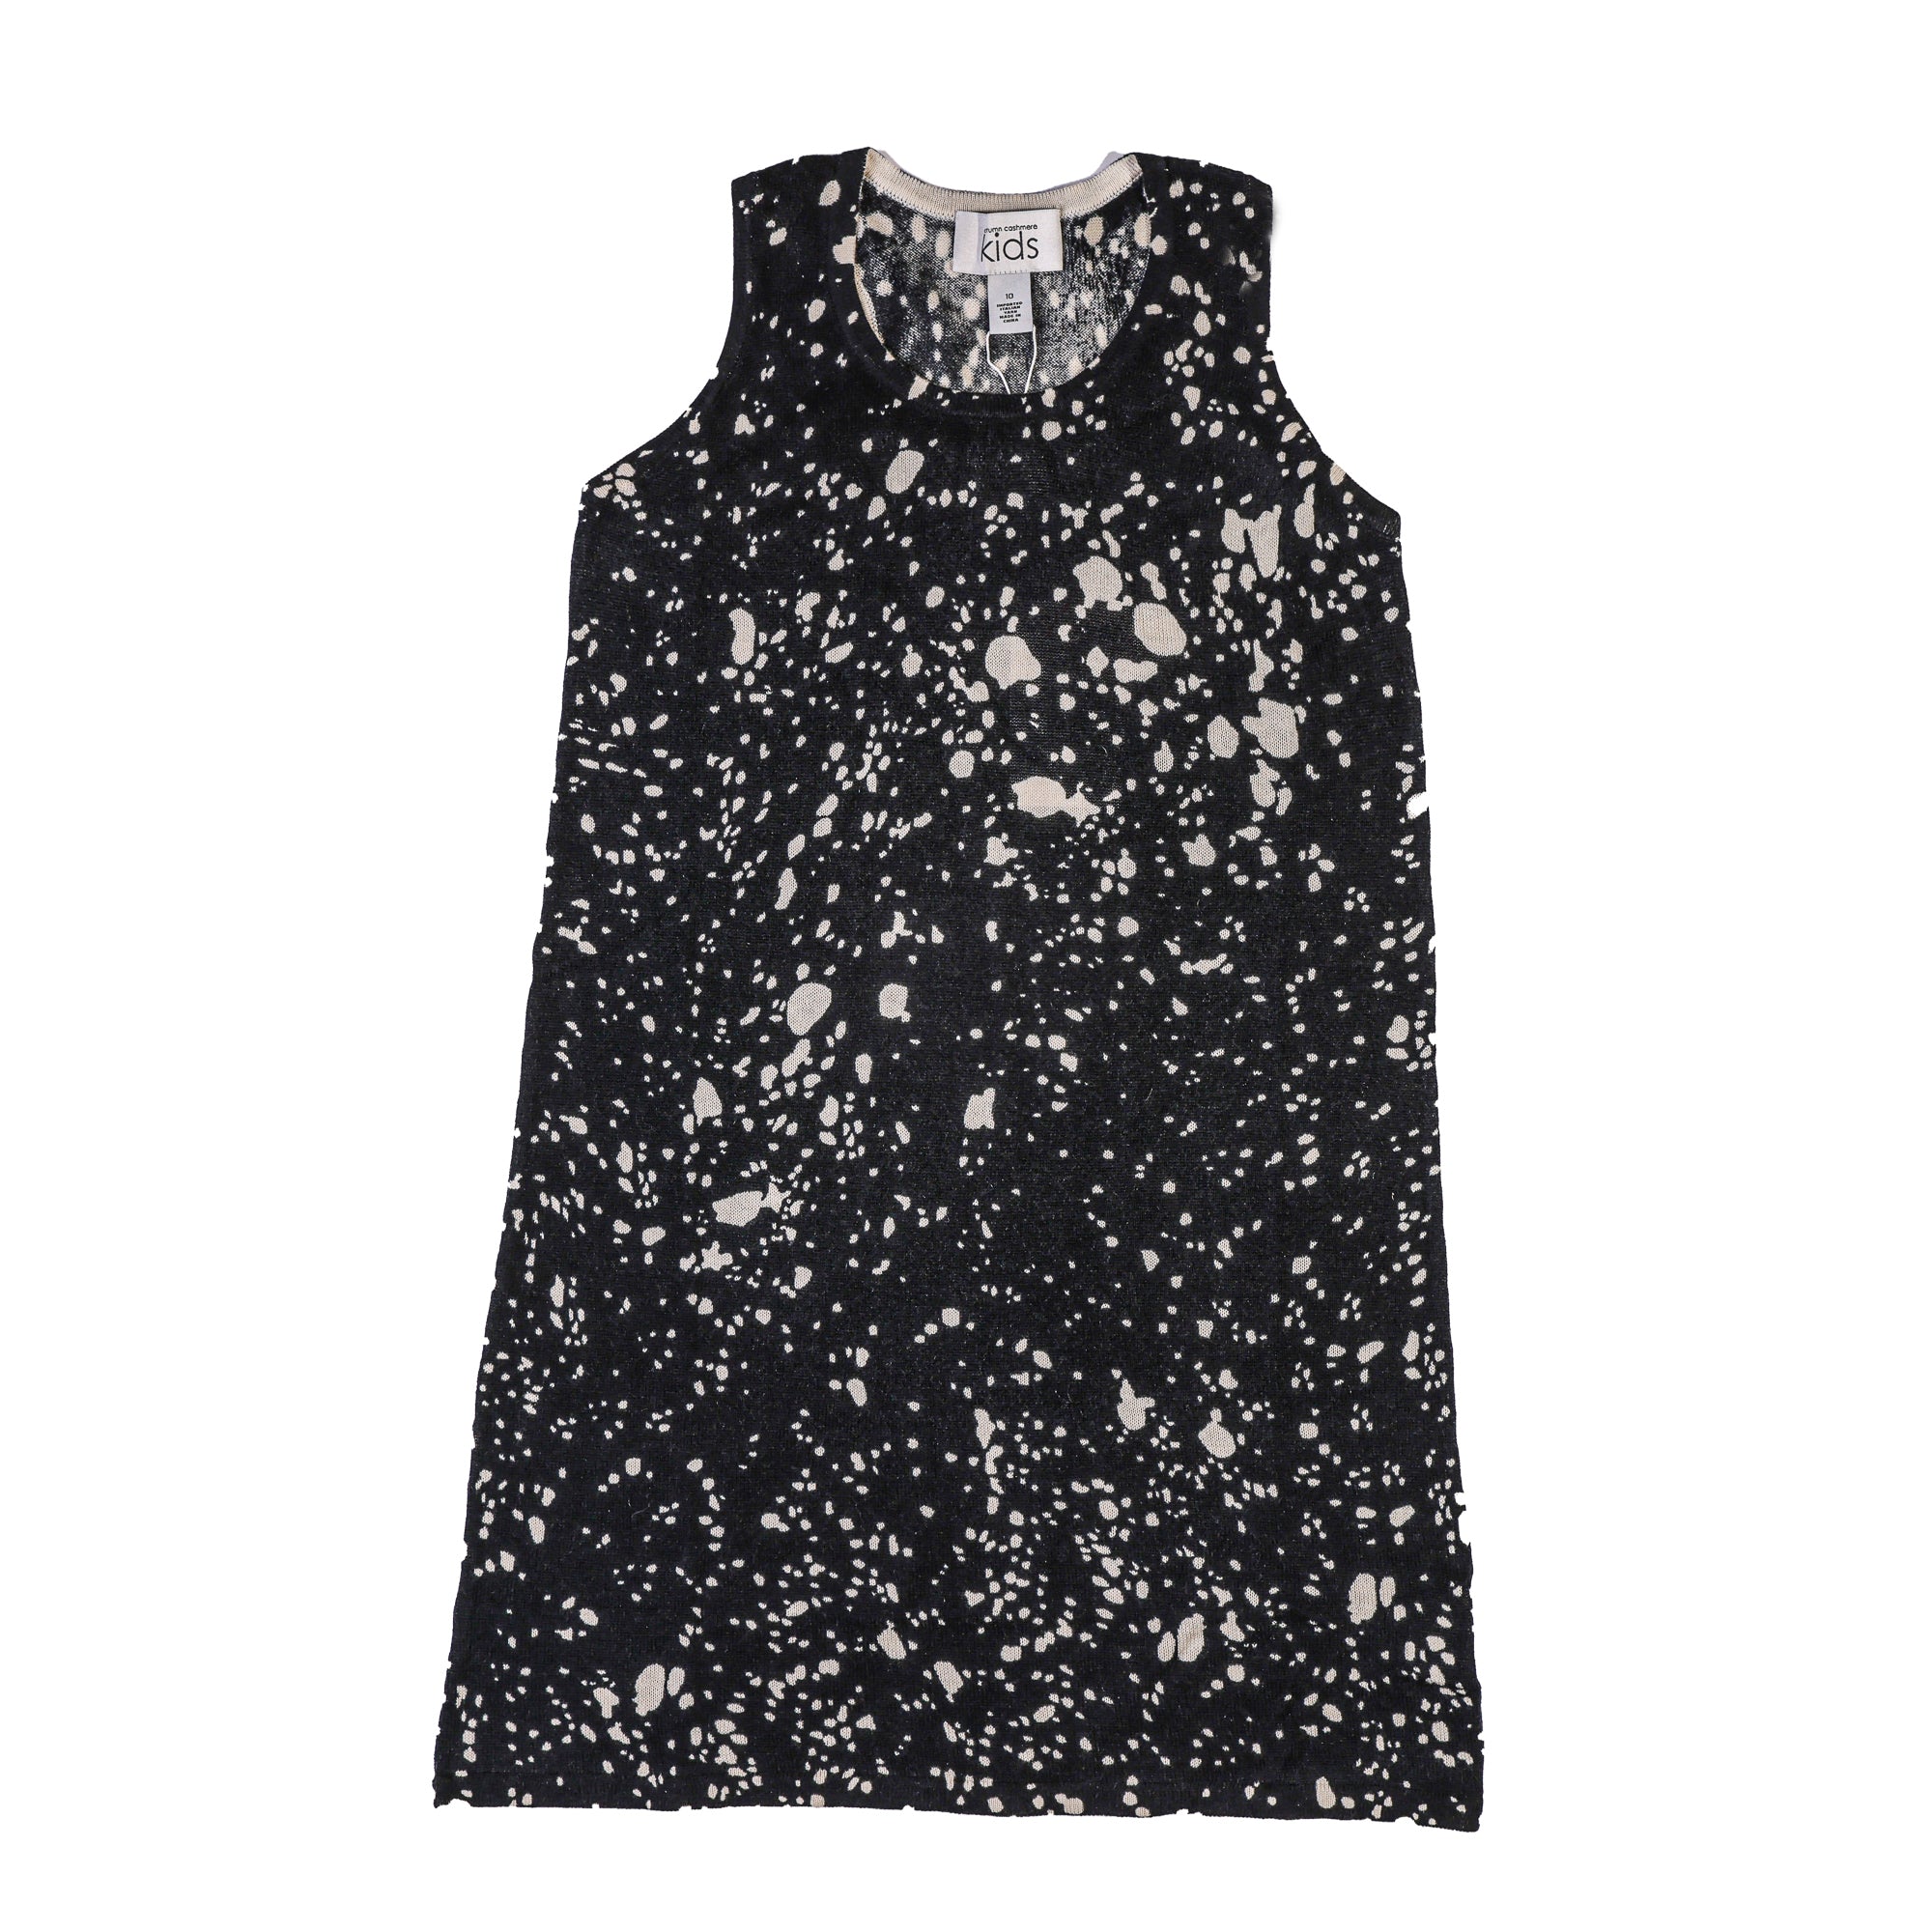 Black sleeveless dresses for girls with brush strokes in white. Top choice for formal girls party dresses.